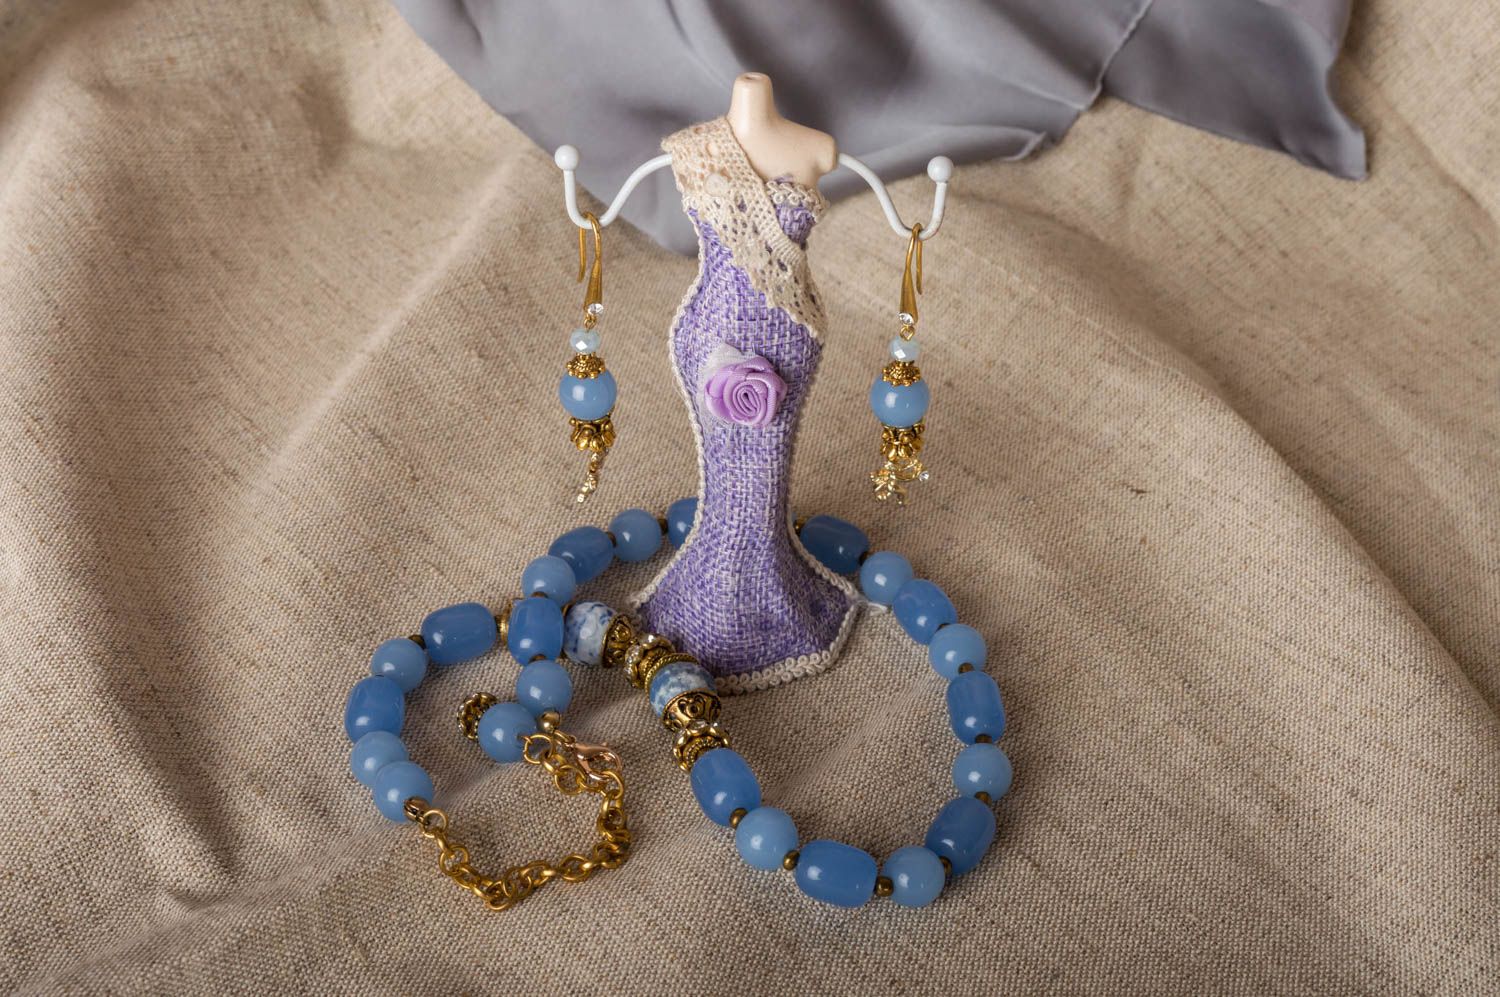 Handmade blue set of jewelry with natural stones 2 pieces earrings and necklace photo 1